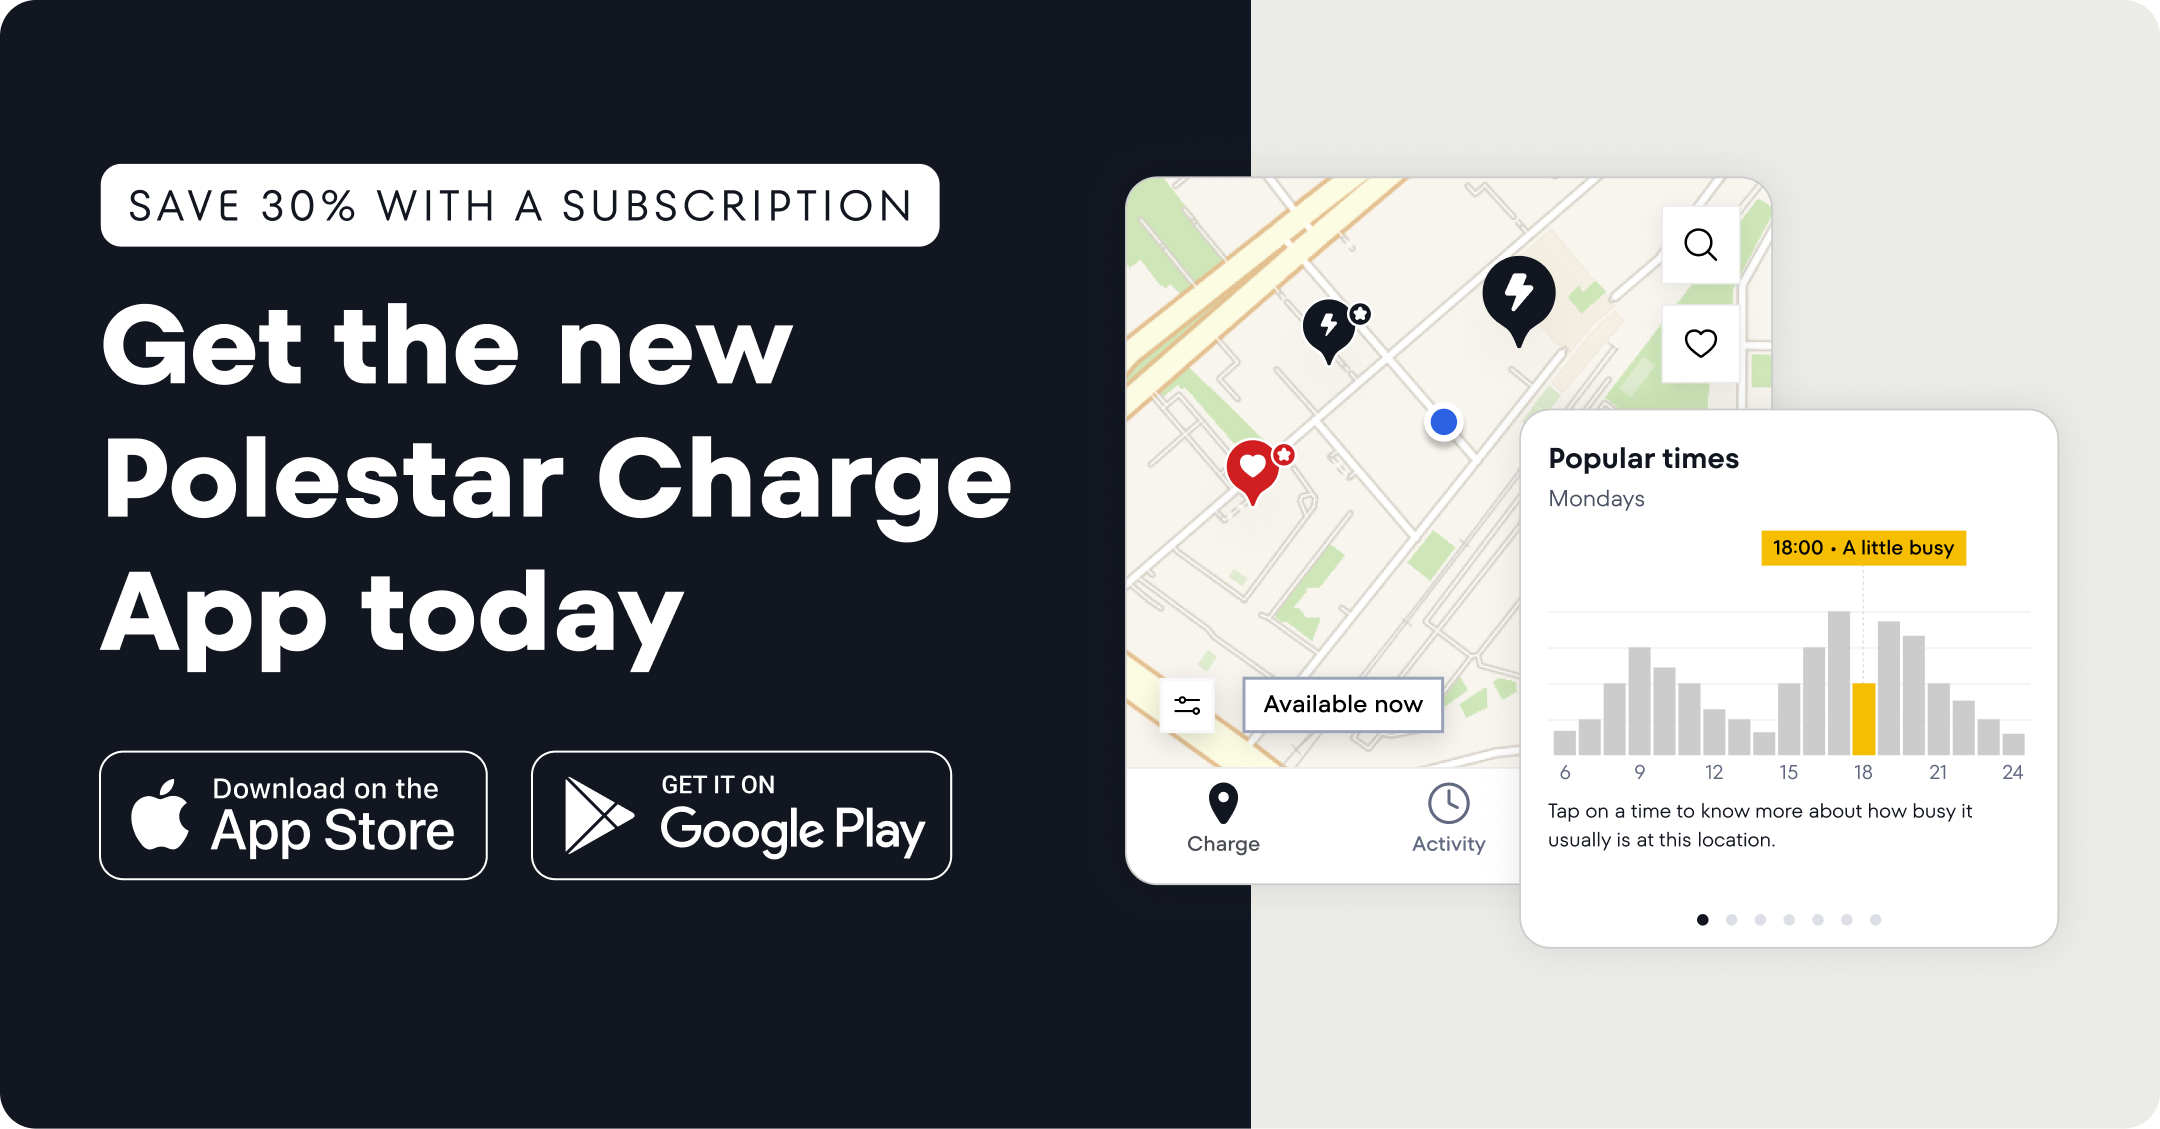 Save 30% with a subscription. Get the new Polestar Charge App today